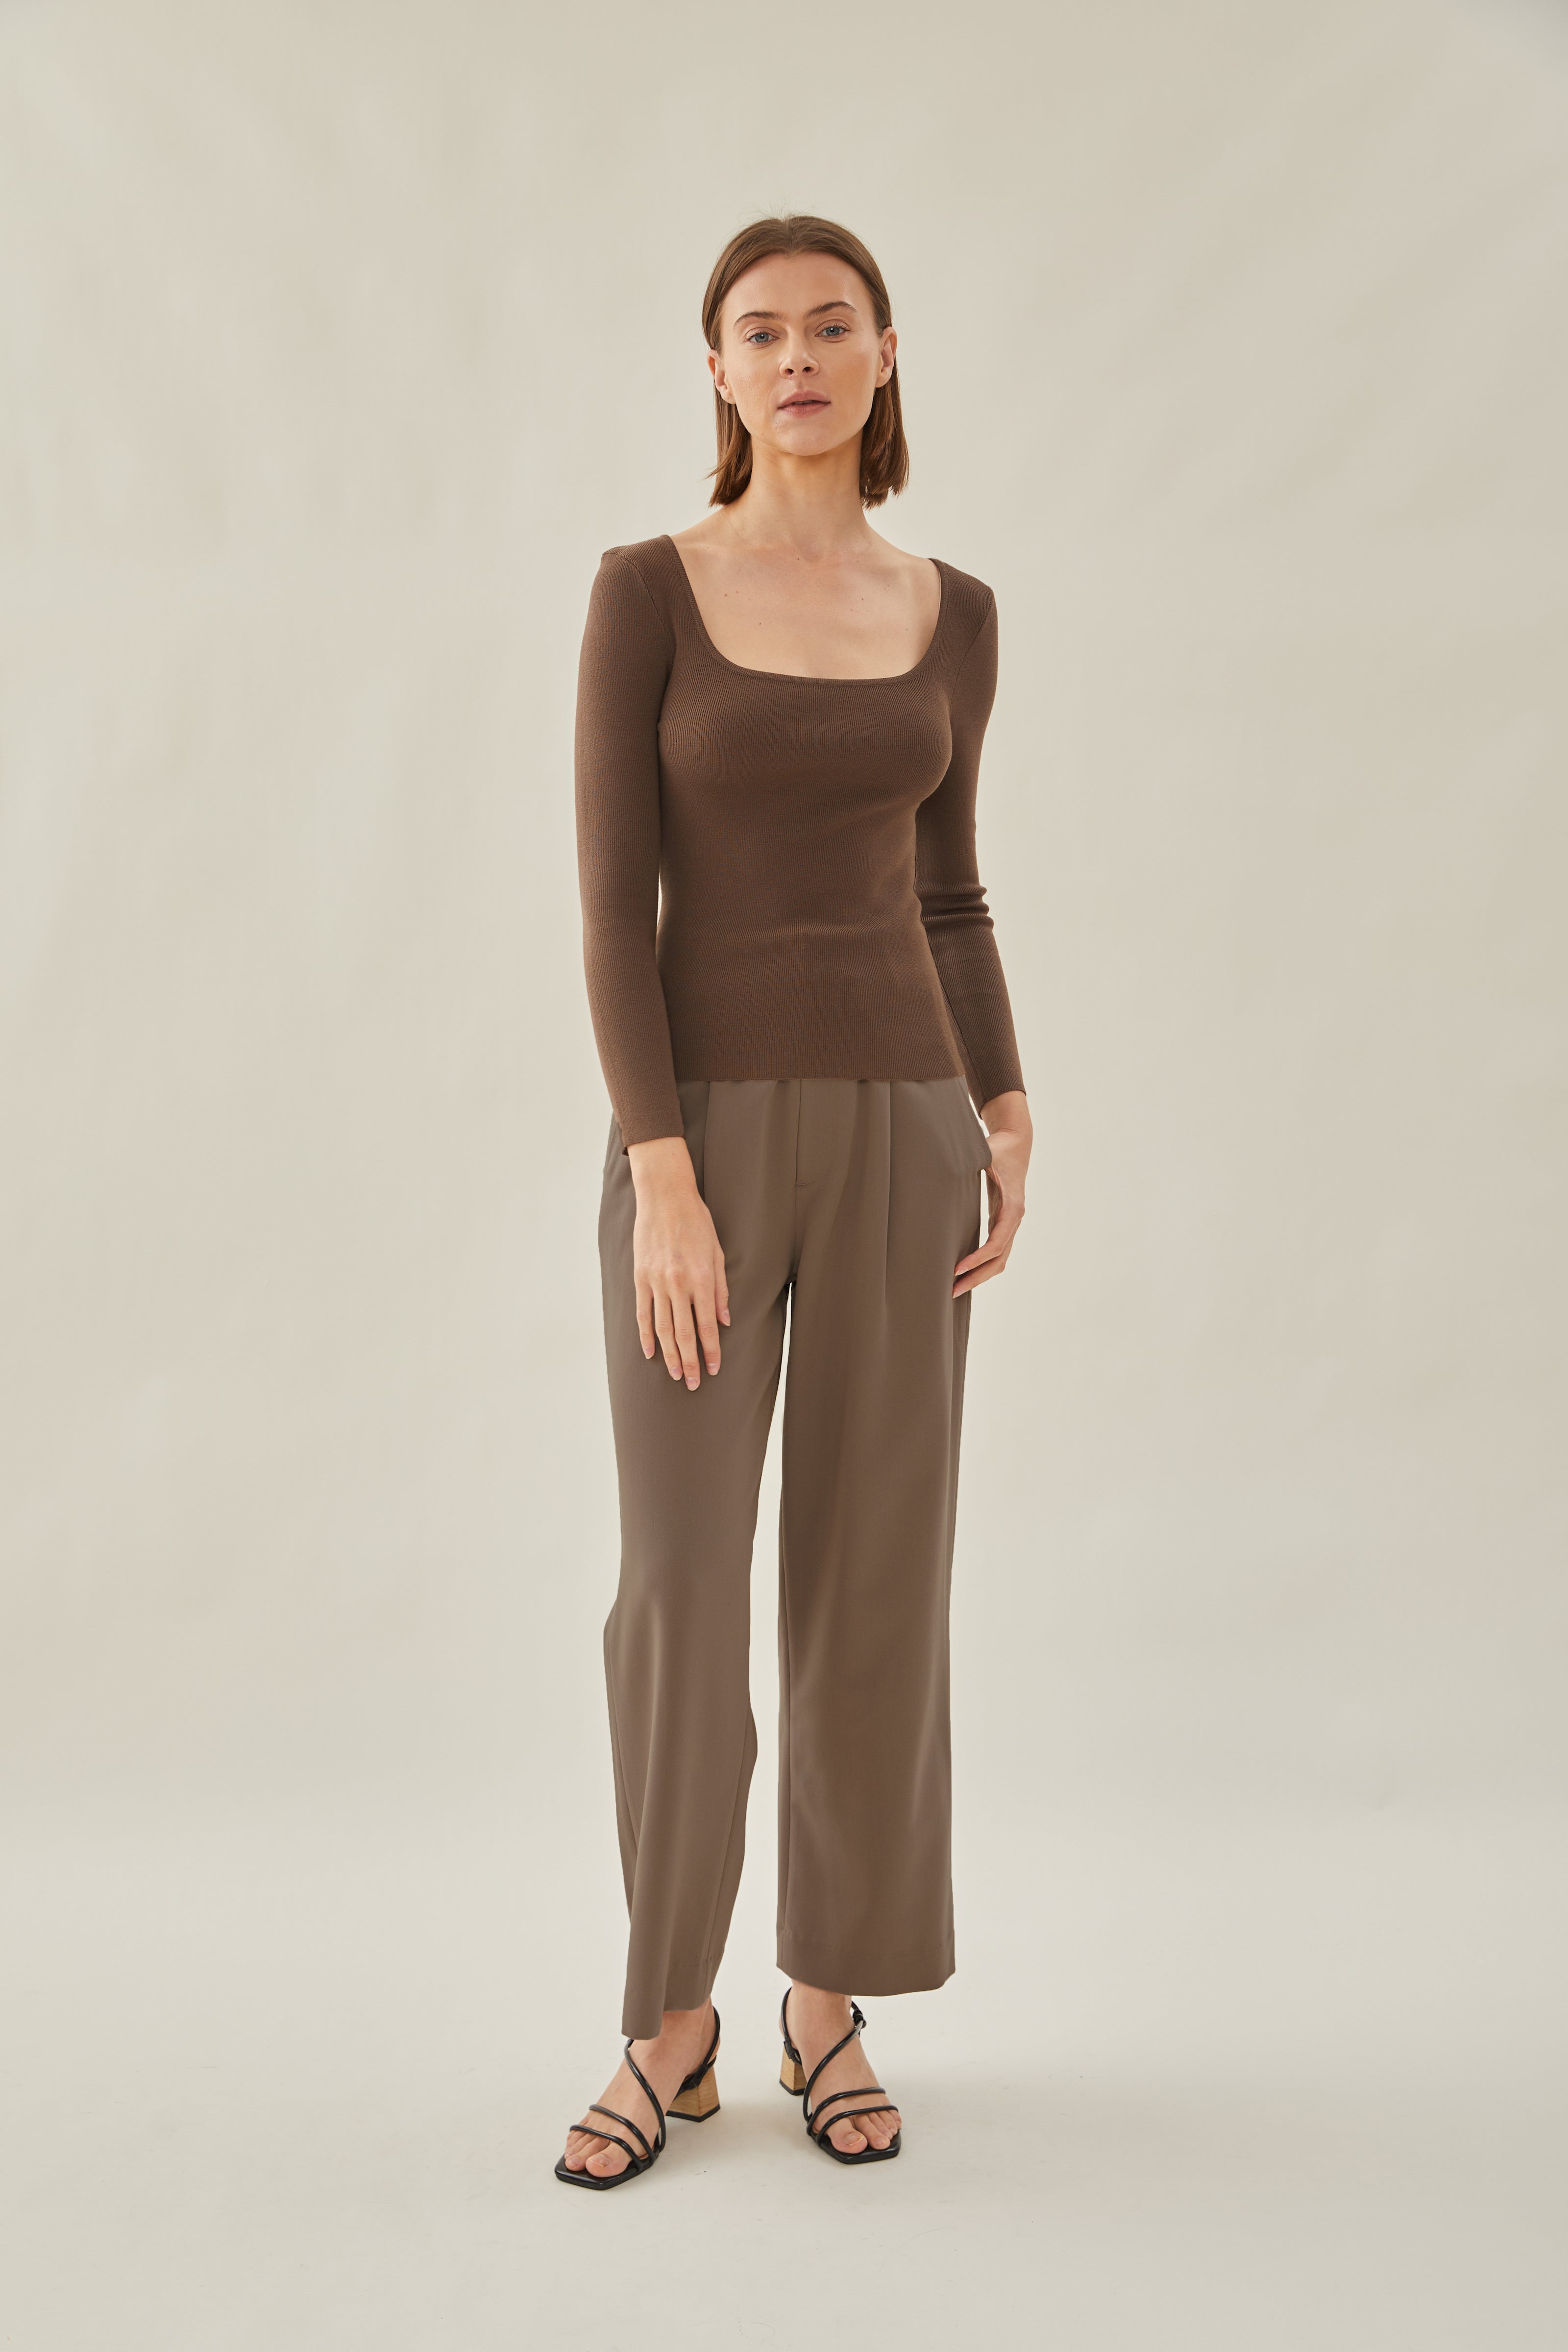 Rounded Square Neck Knit Top in Soil